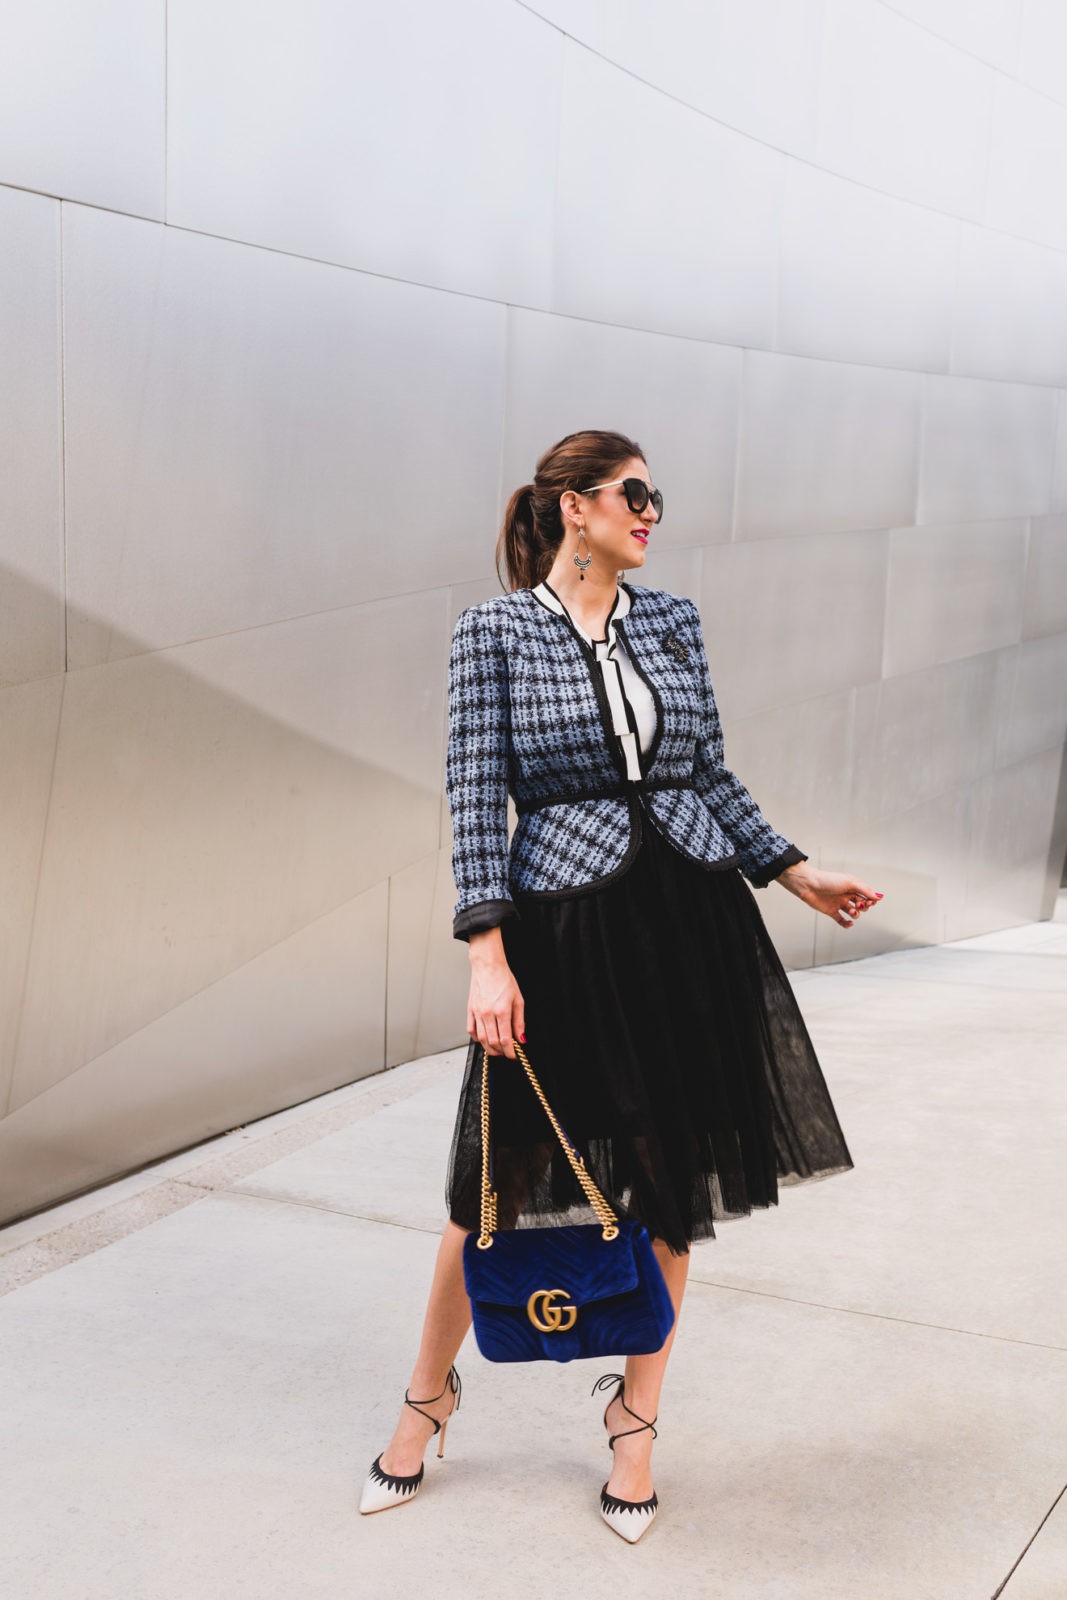 Dressing Nice Everyday featured by top US fashion blogger Laura Lily; Tahari ASL jacket, Gucci bag, Prada sunglasses, Icing earrings and PLV shoes